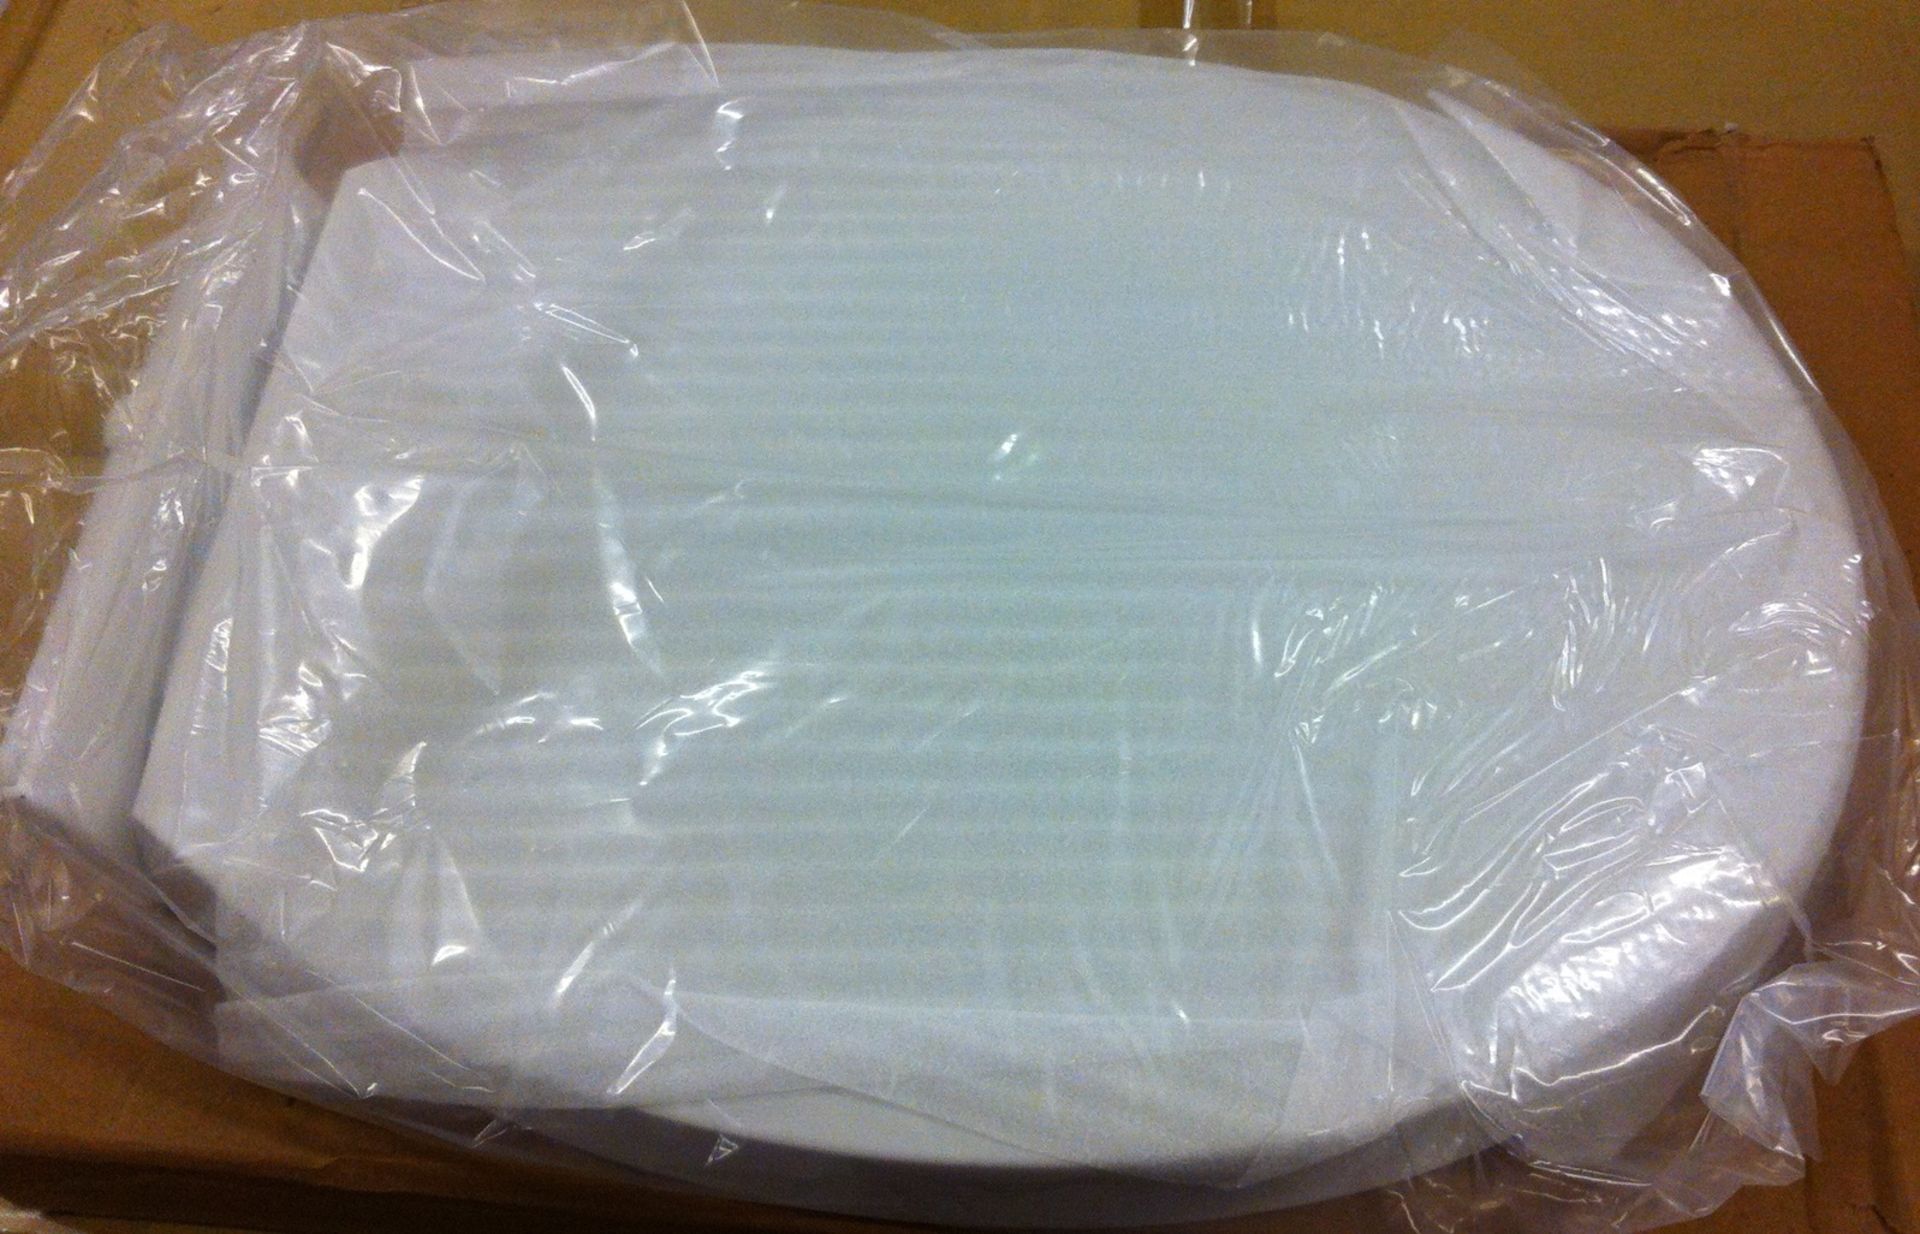 100 x Deluxe Soft Close White Toilet Seats - Brand New Boxed Stock - CL034 - Ideal For Resale - - Image 4 of 6